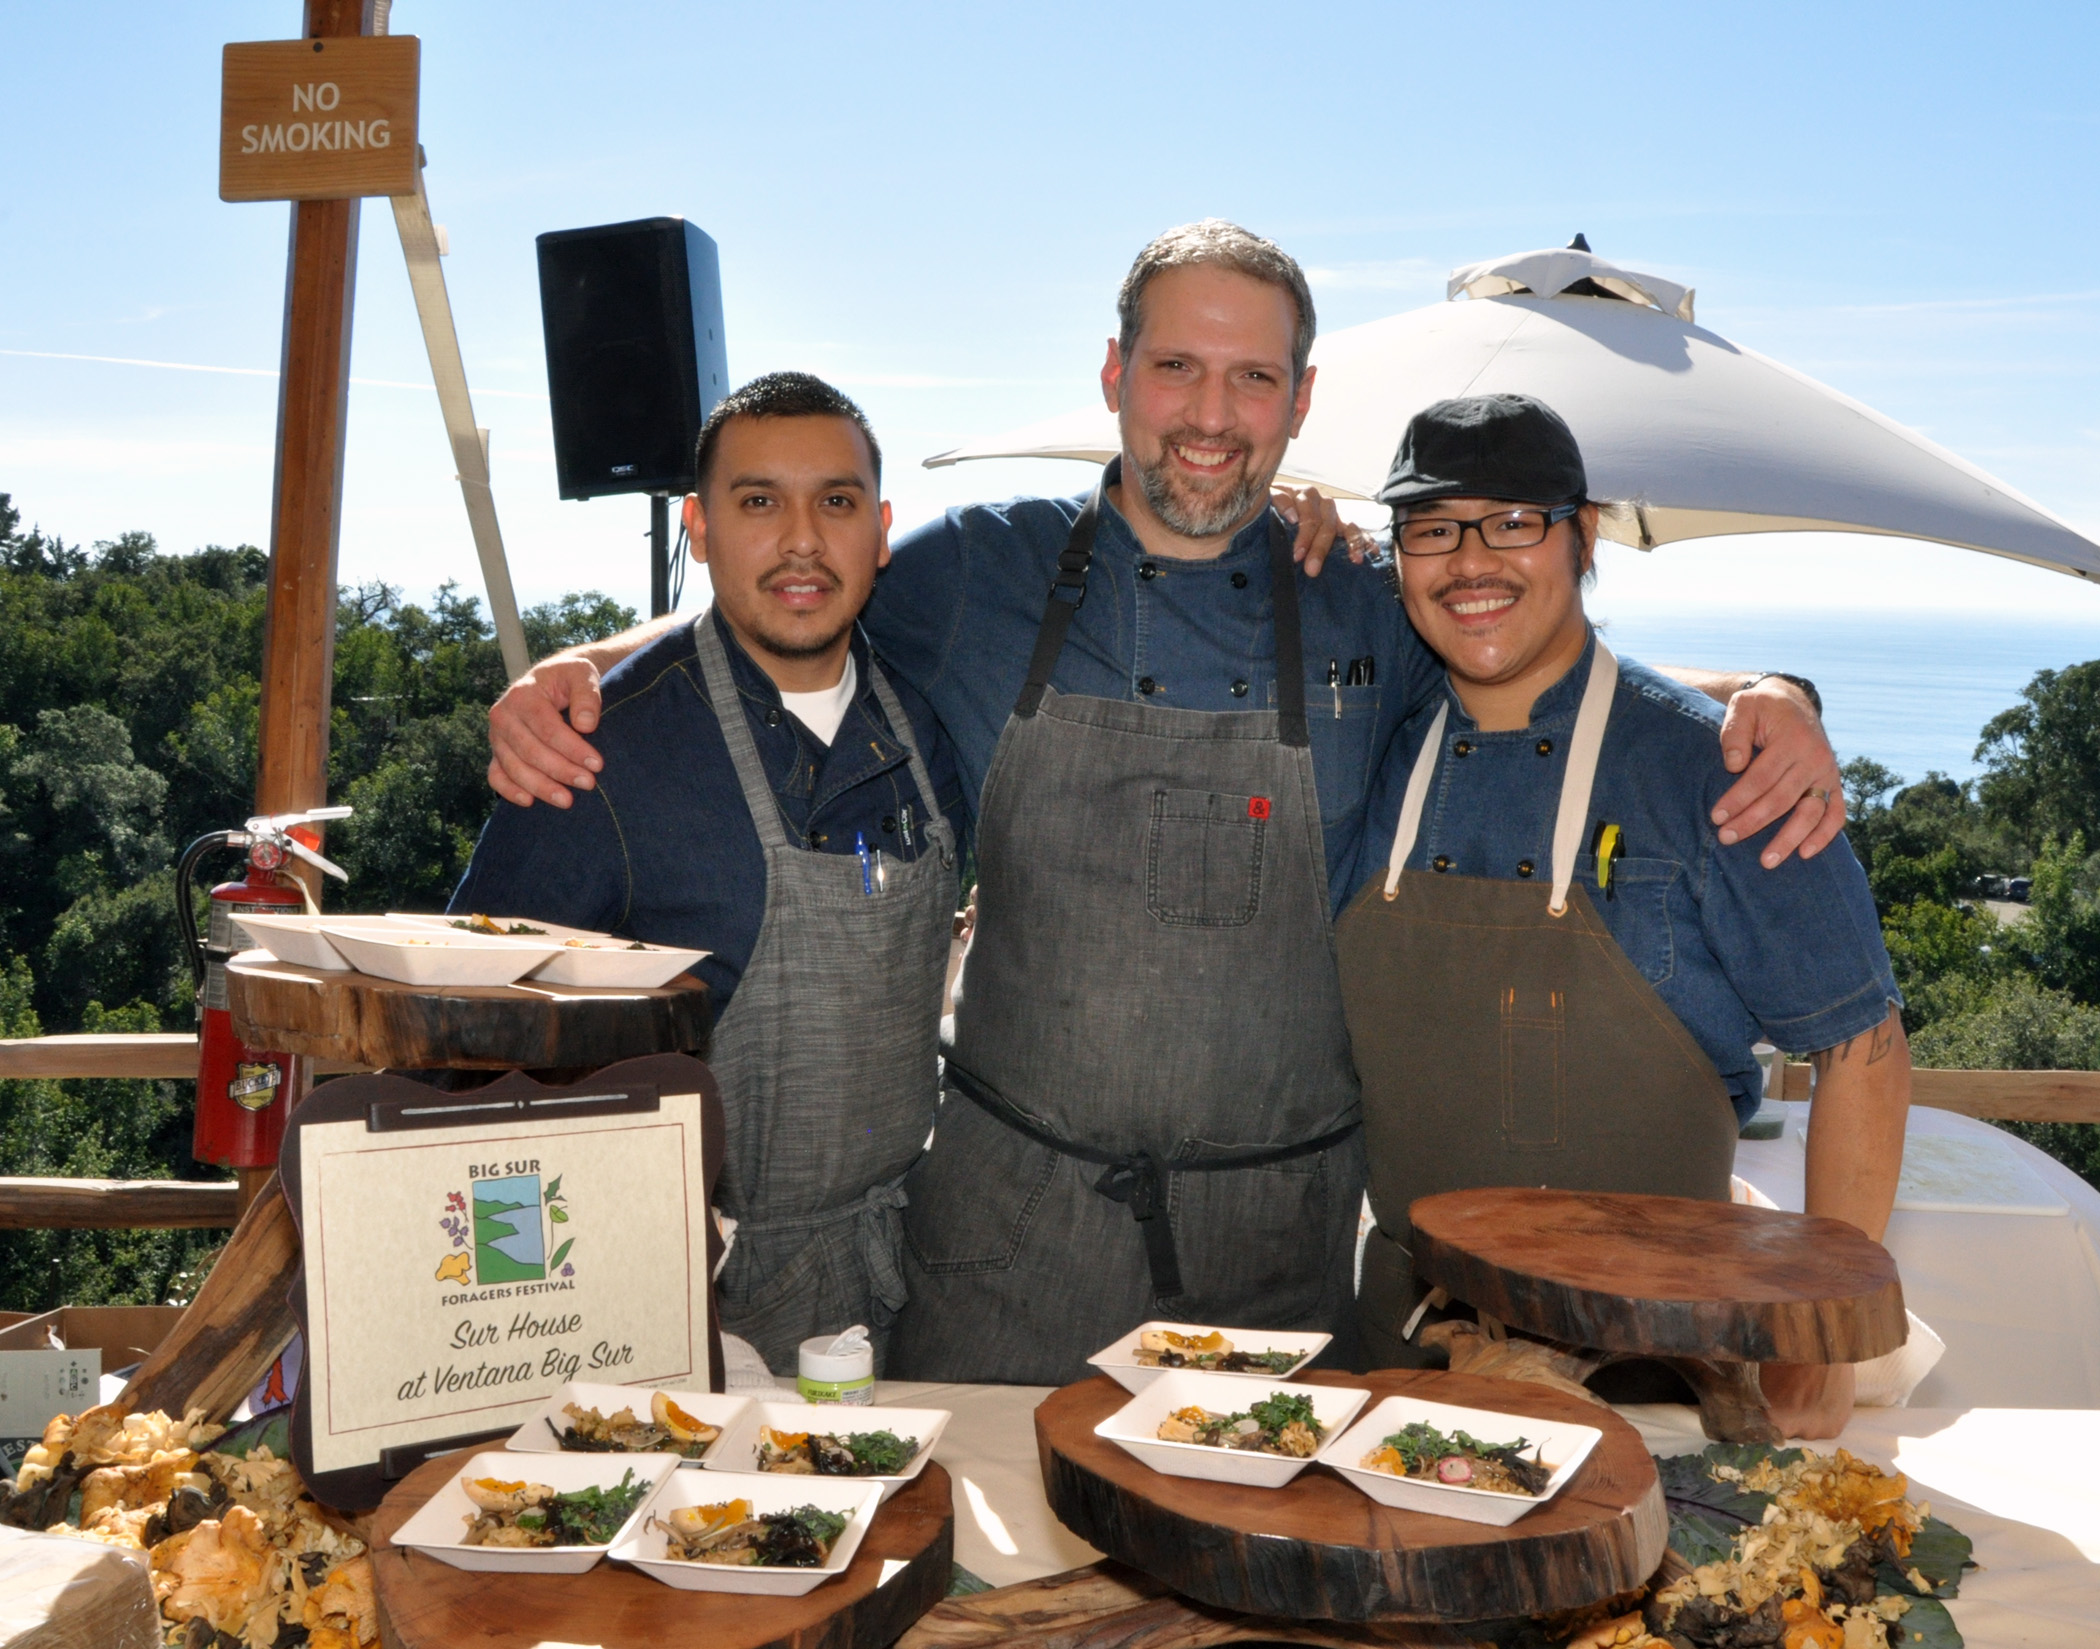 6. Chef and cooks of Sur House at Ventana Big Sur